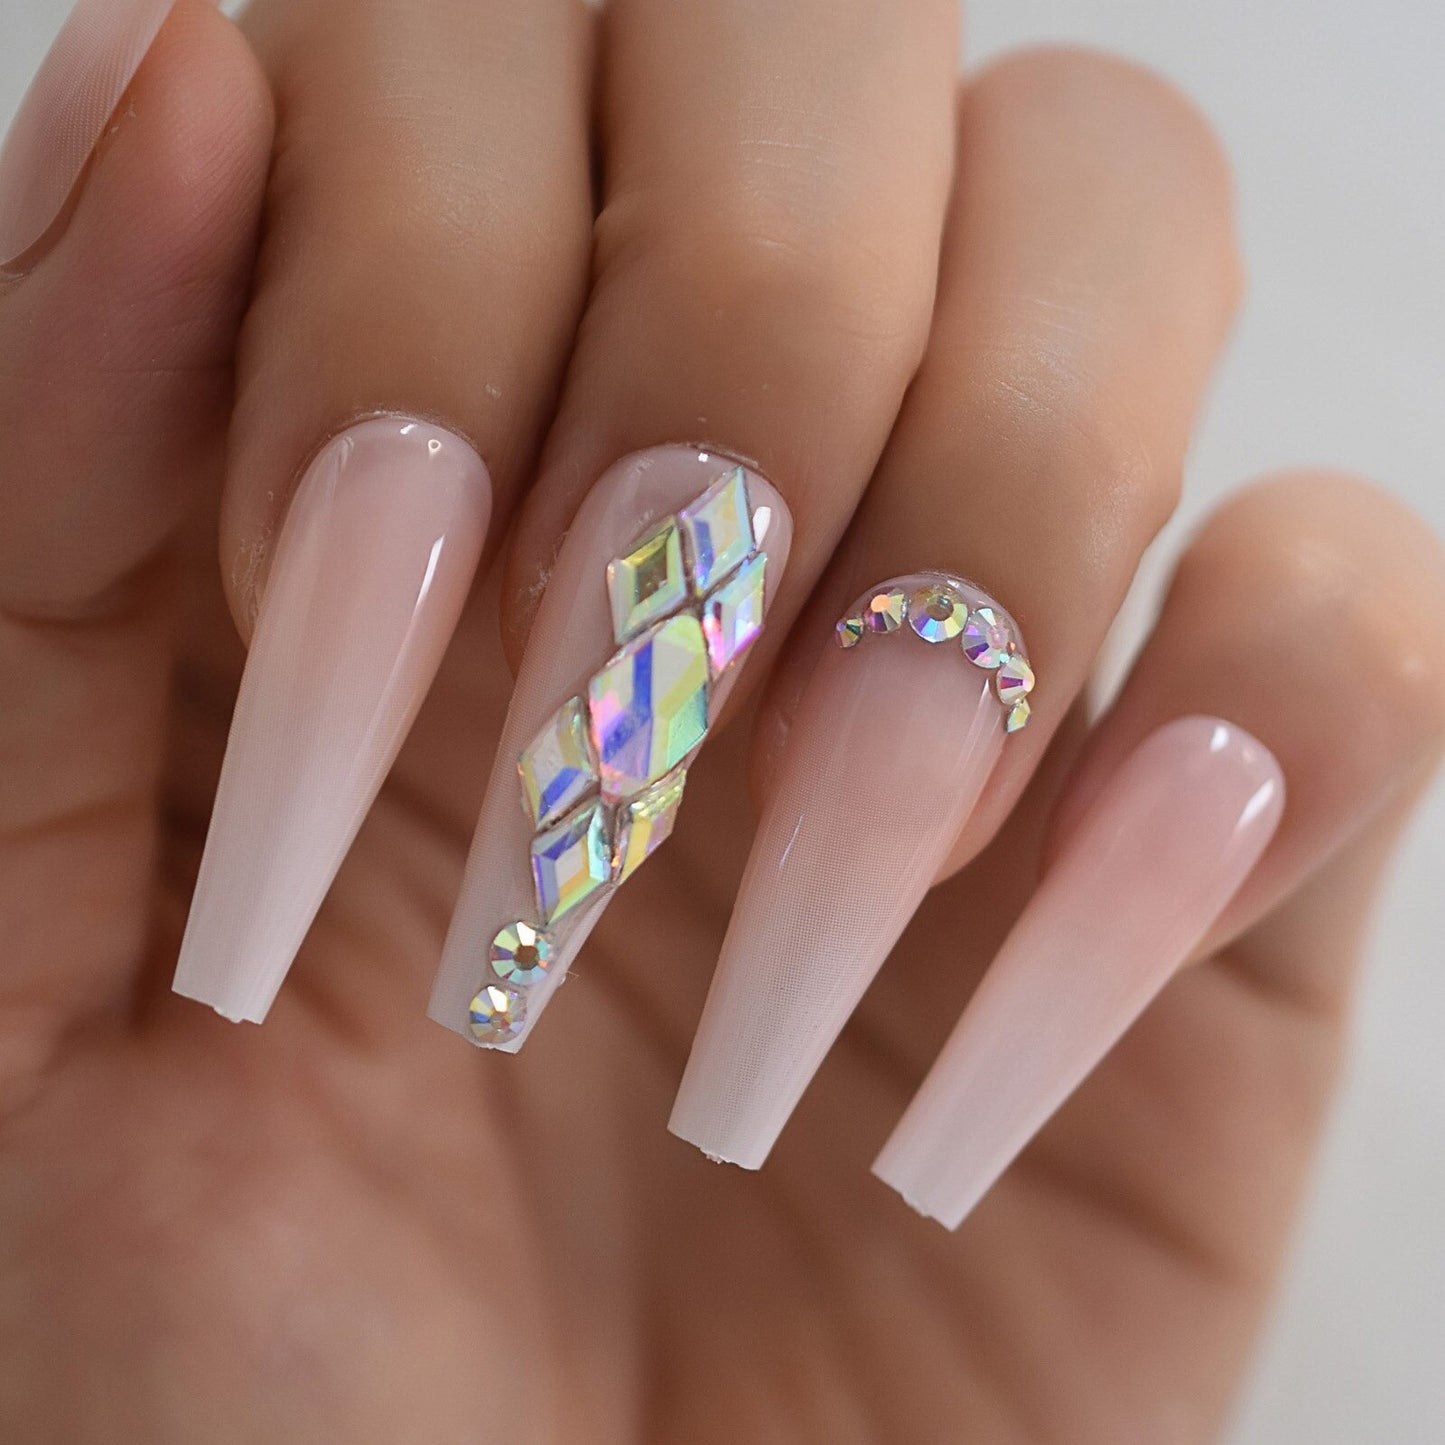 Suzu Blime Pink Ombre Press On Nails